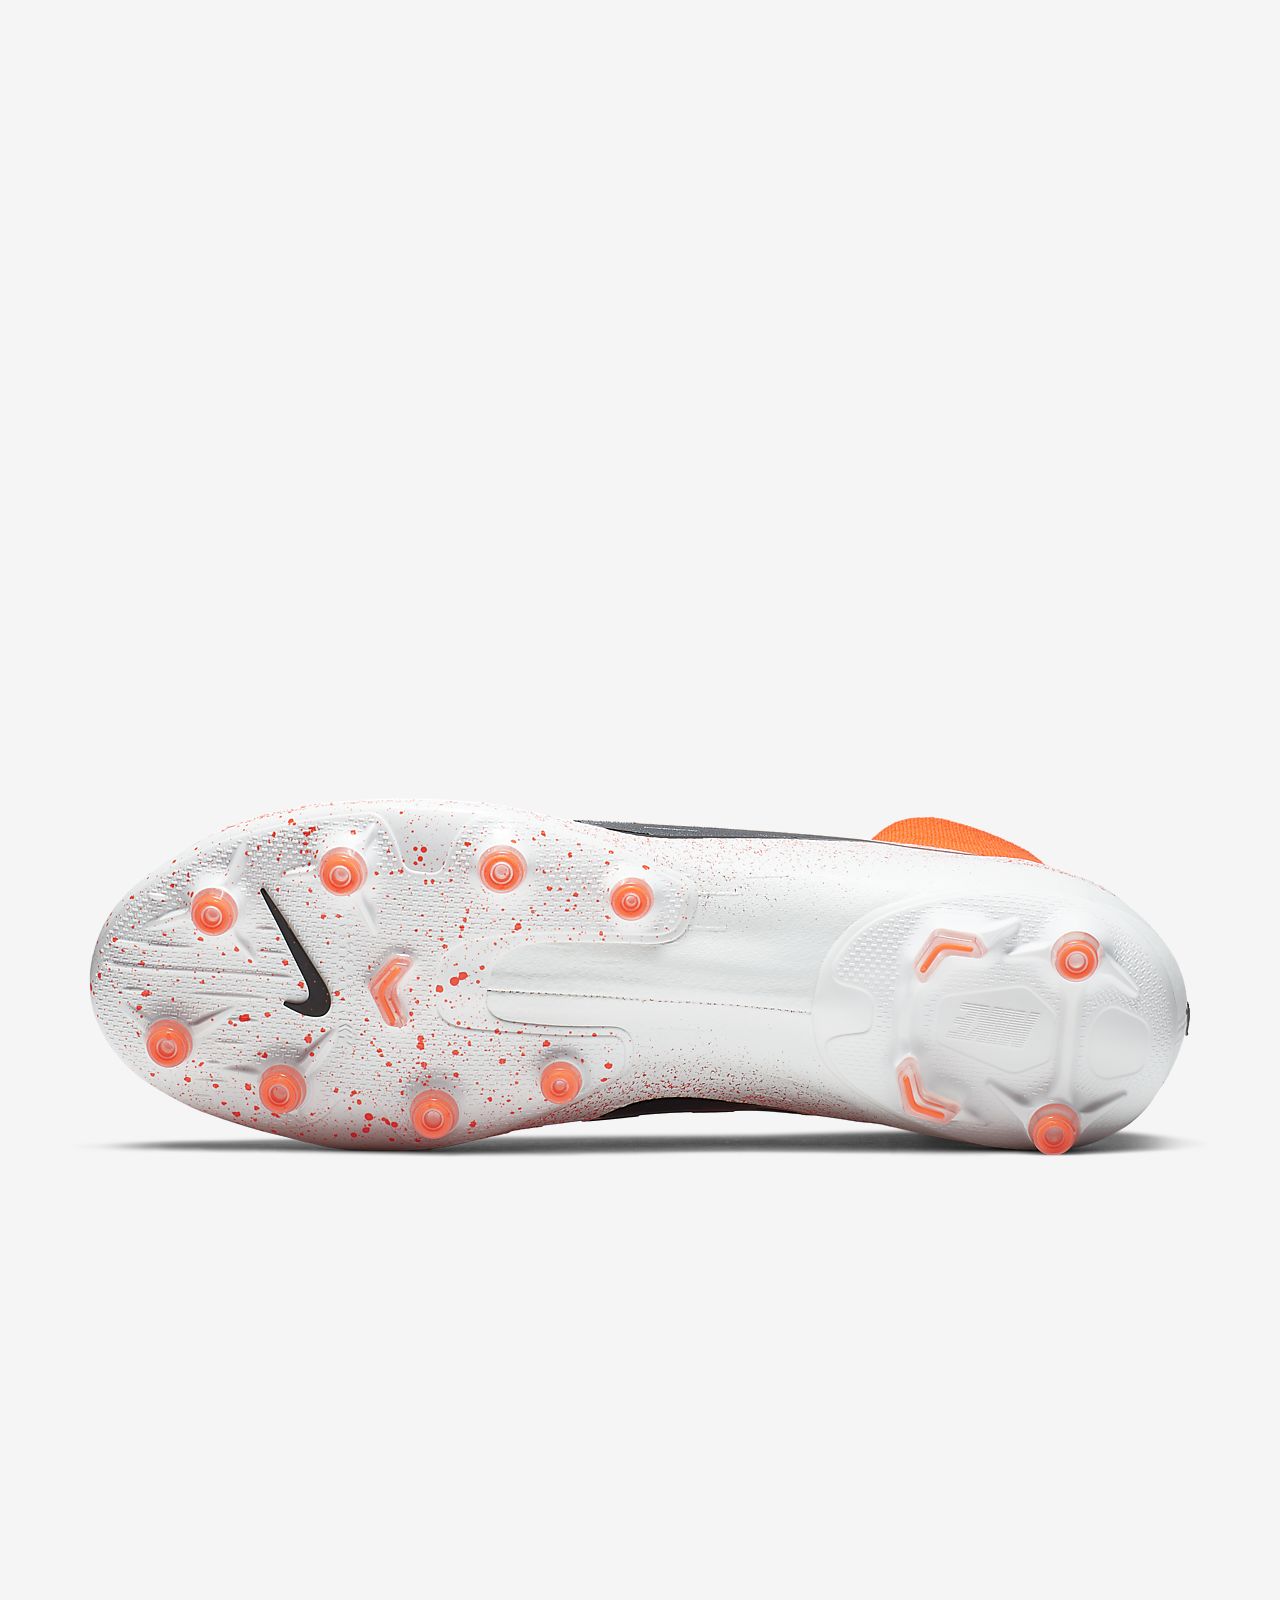 LIMITED EDITION NIKE MERCURIAL SUPERFLY CR7